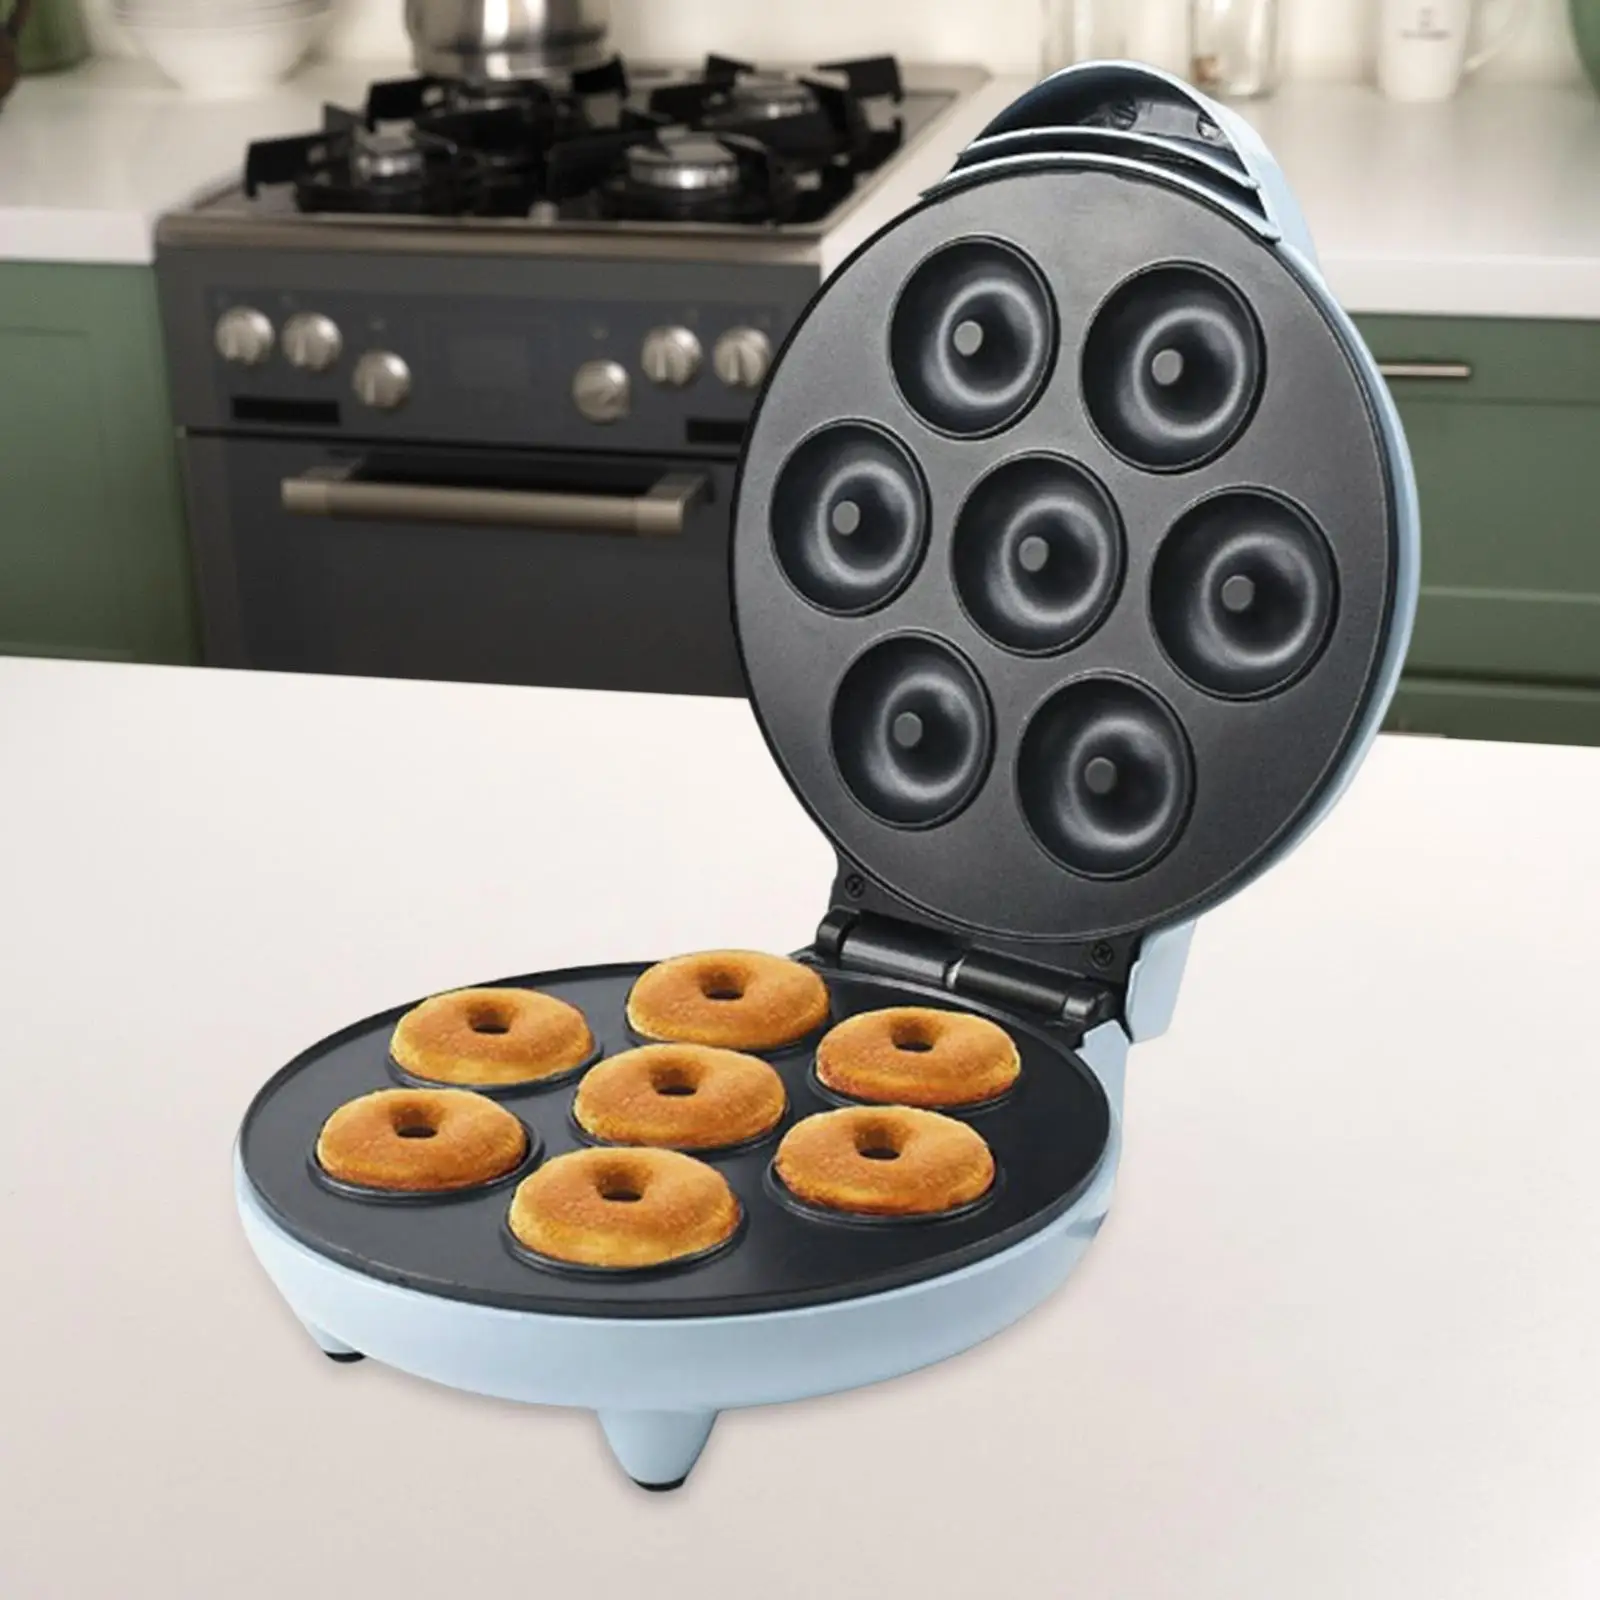 Donut Maker Nonstick Household Cake Machine Automatic Heating Egg Cake Bread Baking Machine for Commercial Use DIY Desserts